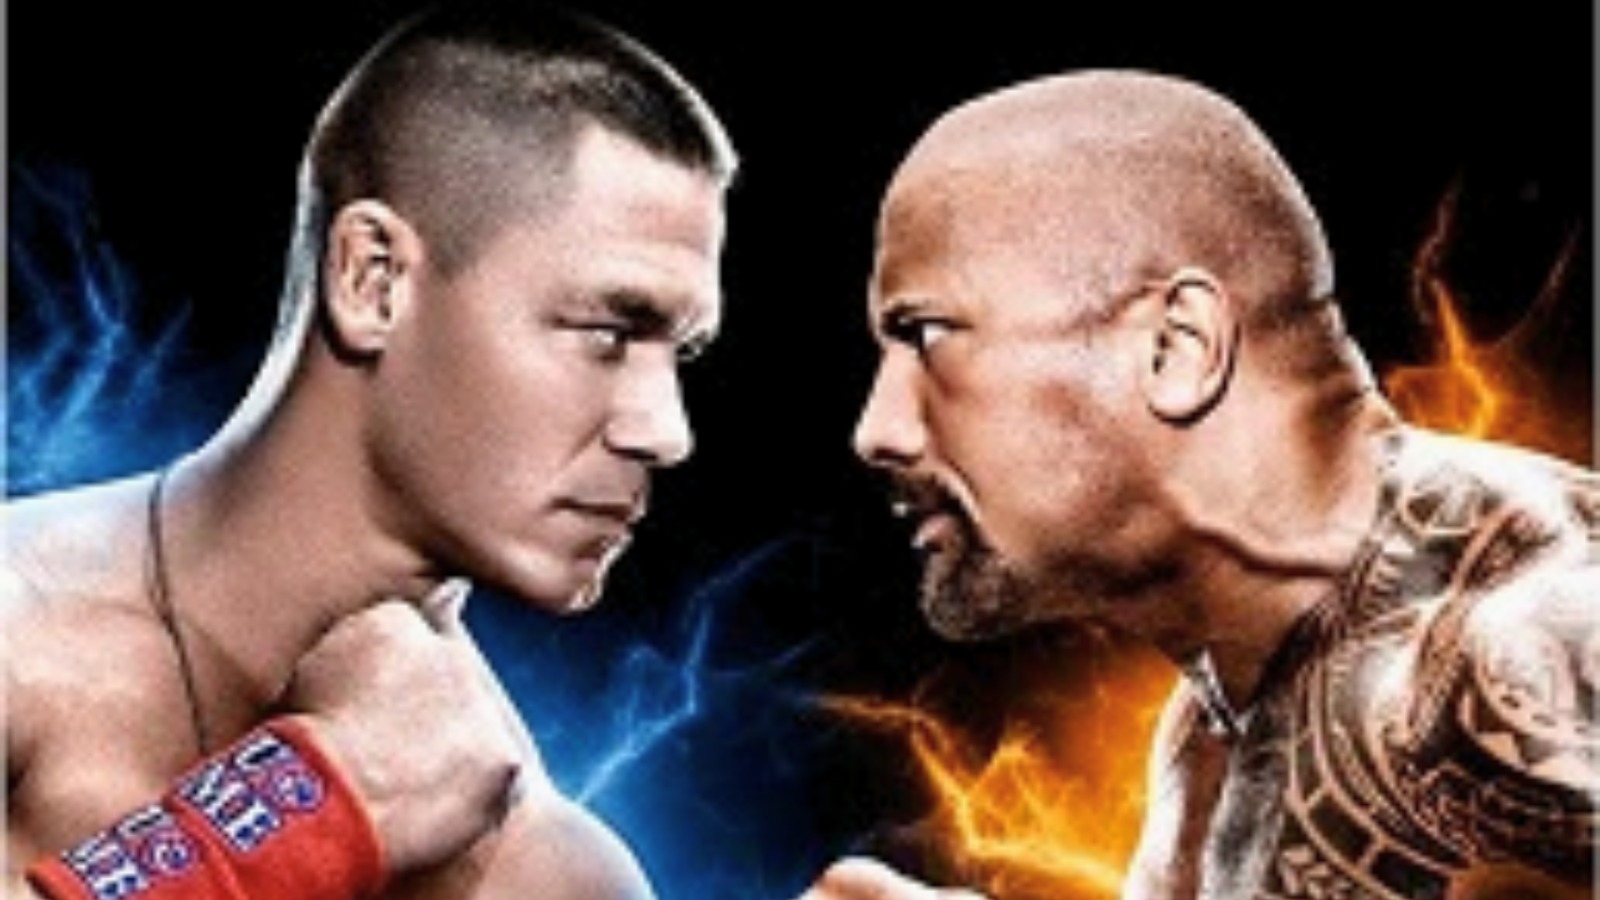 John Cena Vs The Rock: Who is Bigger, Better and Greater in the WWE?